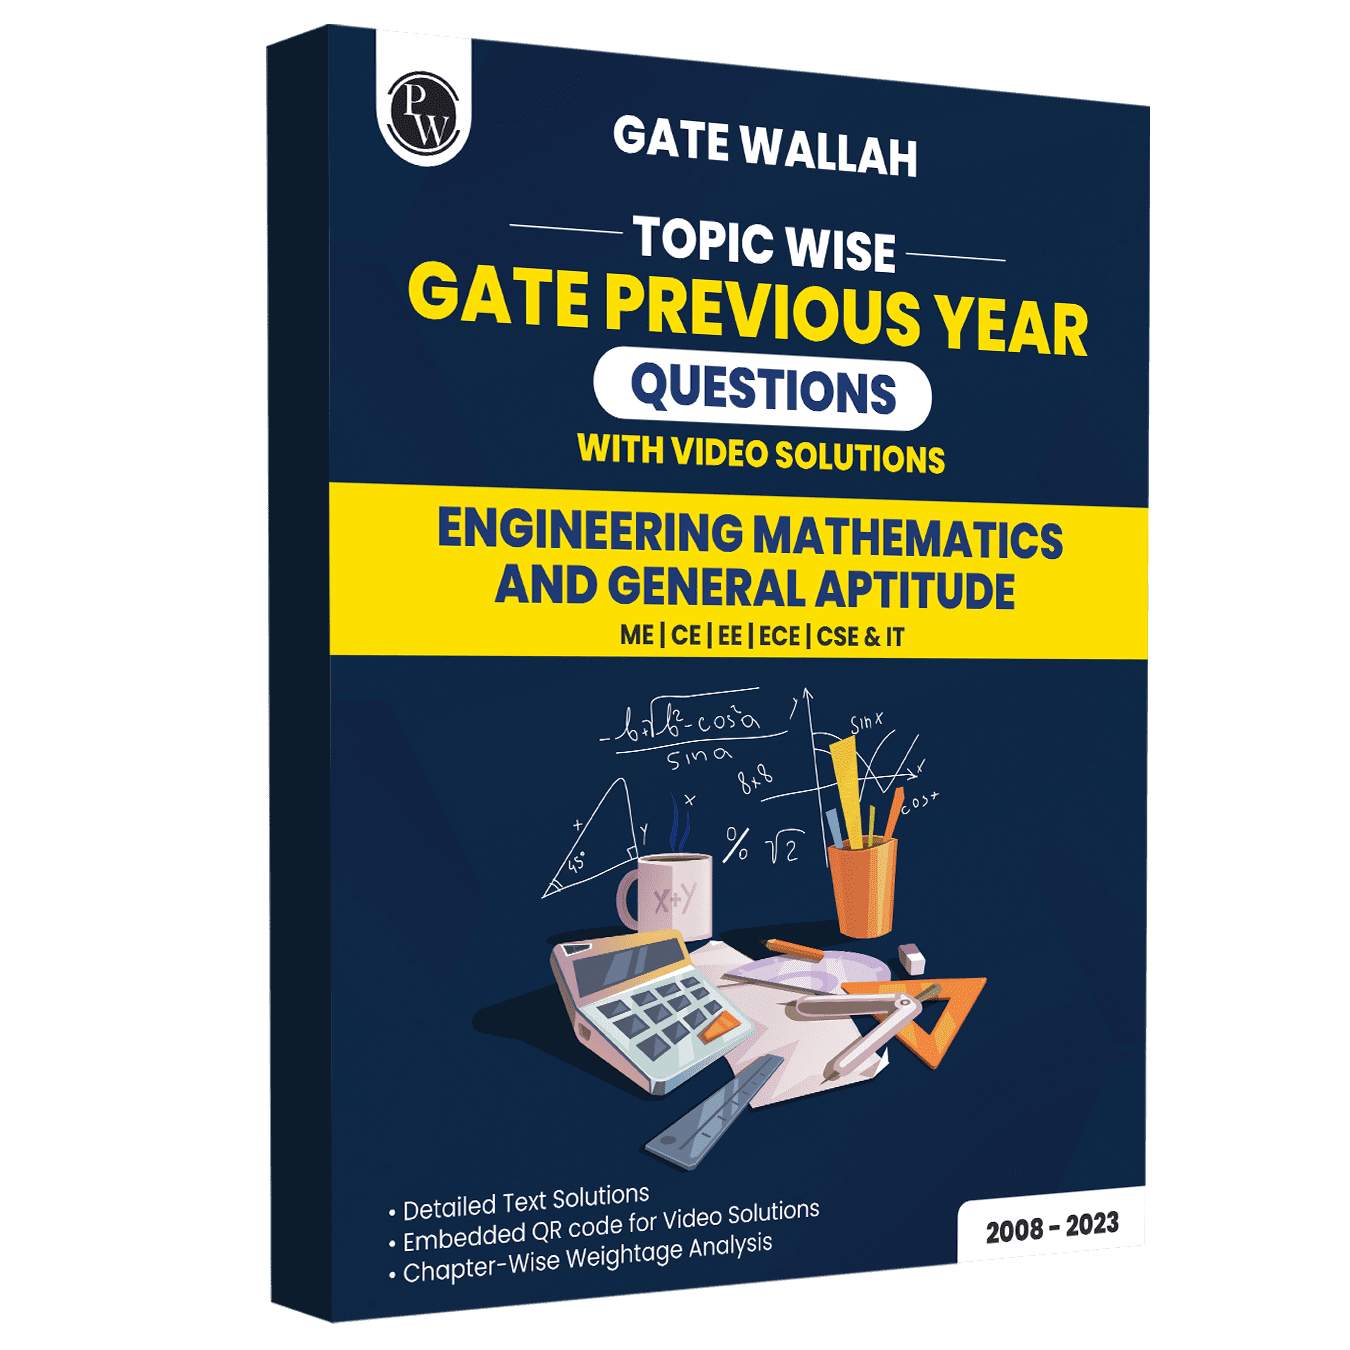 GATE Wallah Topicwise Previous Year Questions-Engineering Mathematics & General Aptitude